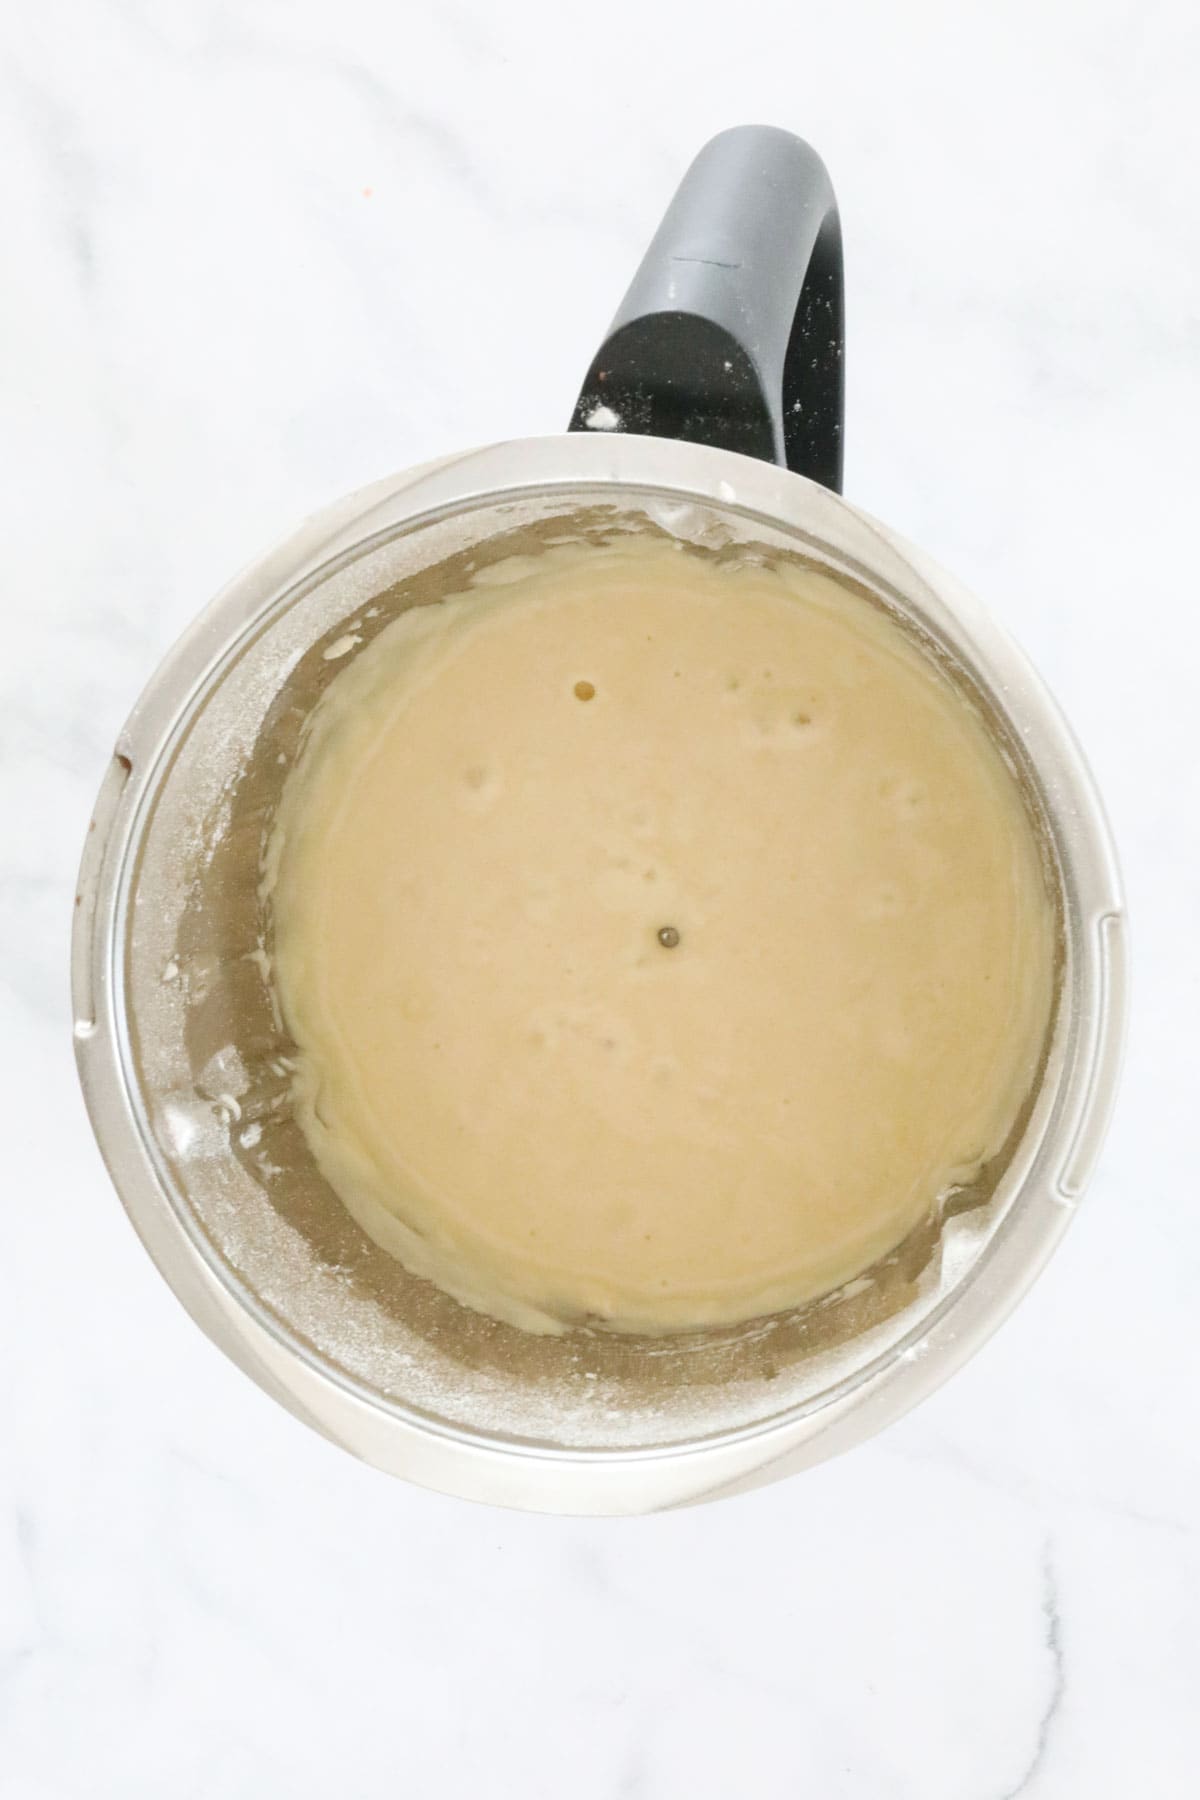 Muffin batter in a Thermomix.